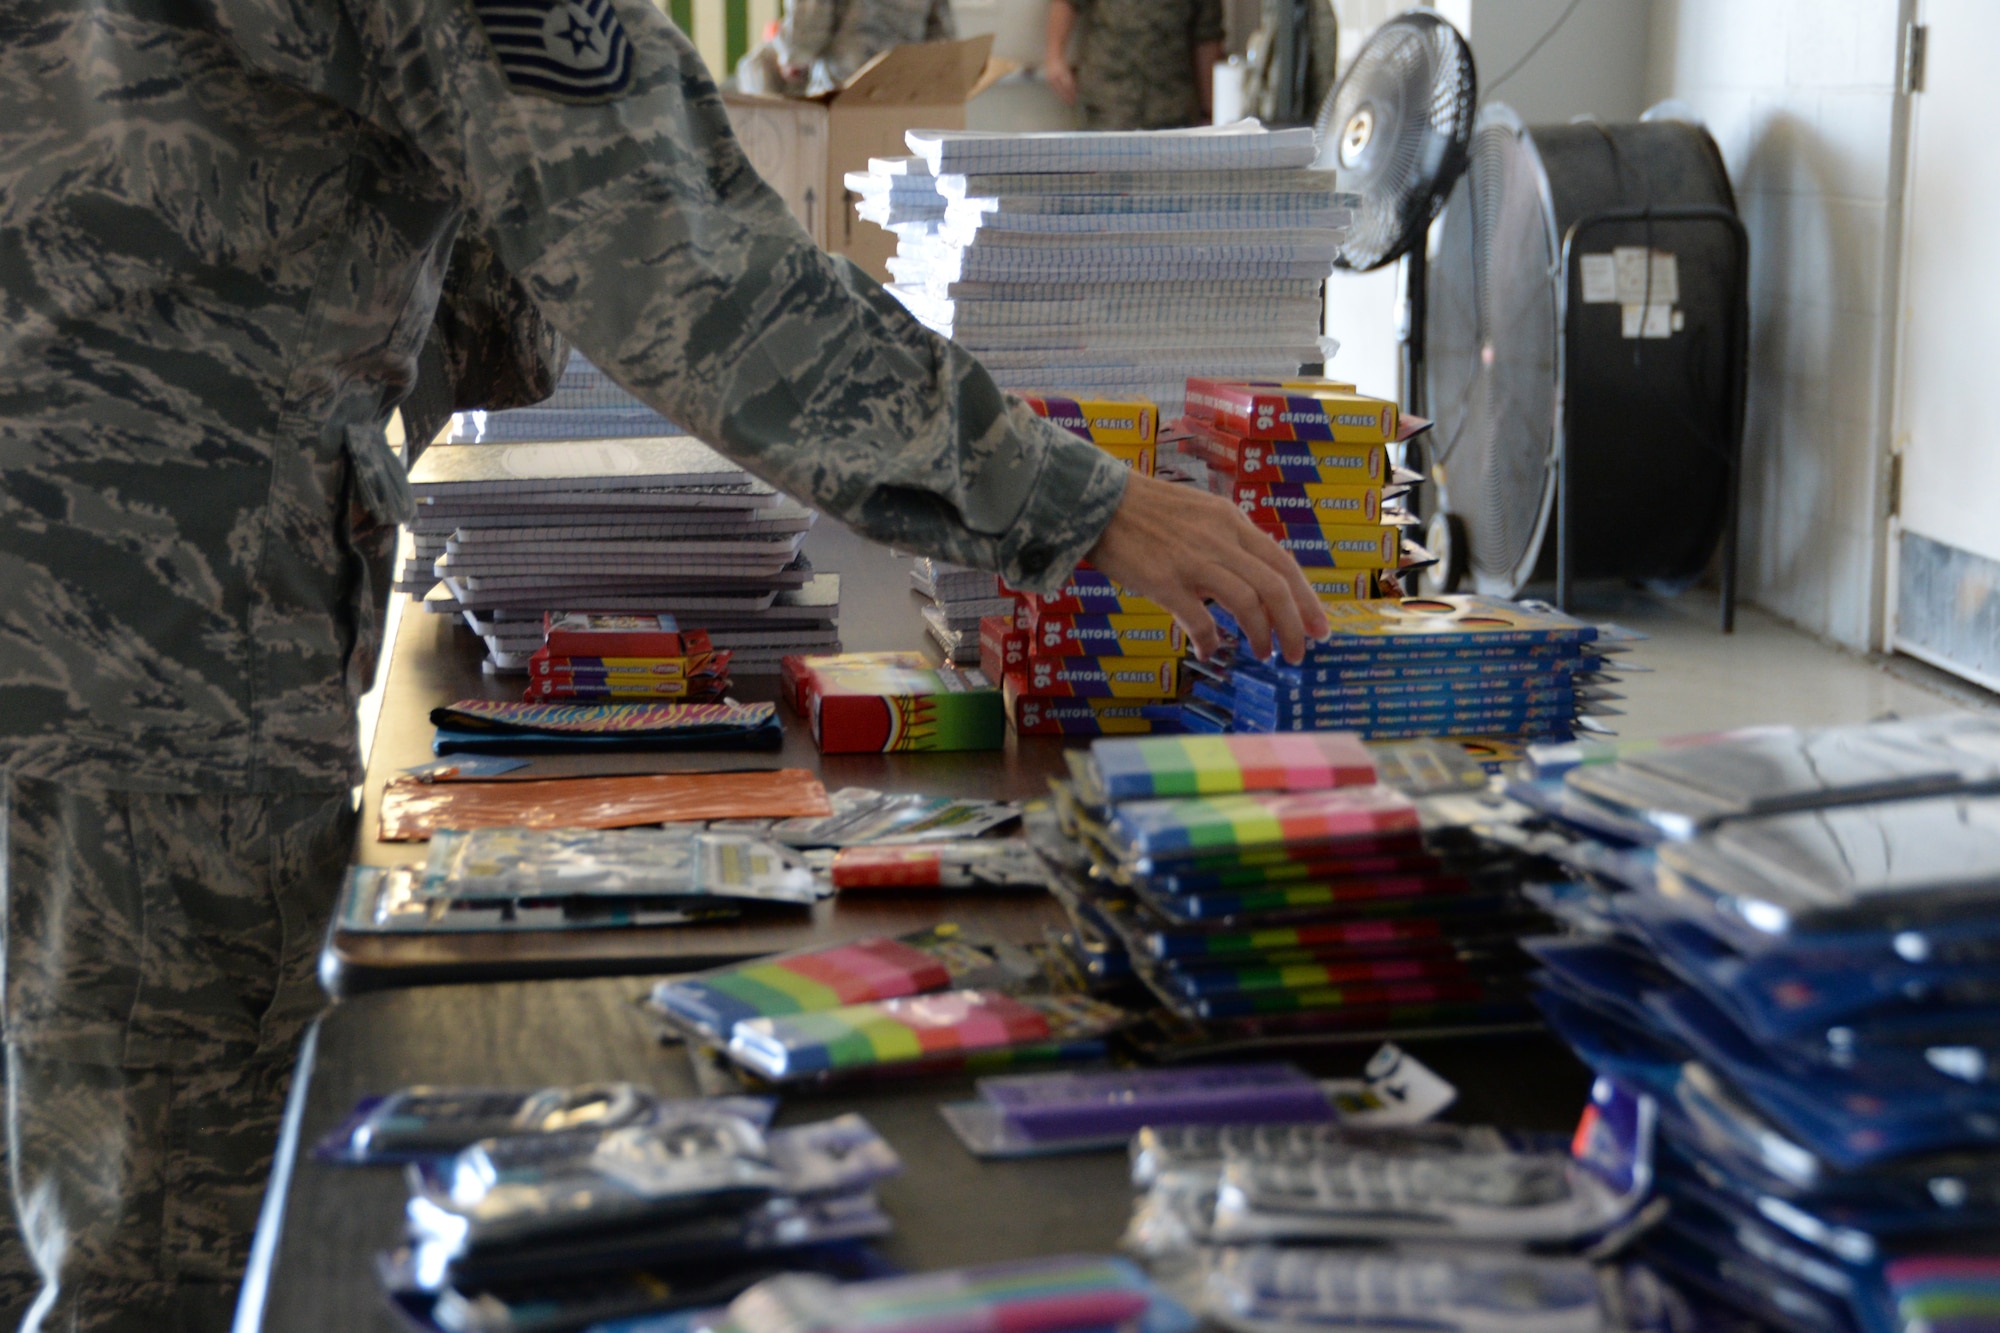 U. S. Air Force Airmen browse school supplies donated to military personnel by local community members through Operation Home front: Back to School Brigade. This operation gives back to those who serve the community as a member of the armed services. (U.S. Air National Guard photo by Airman 1st Class Kevin D. Schulze/Released)